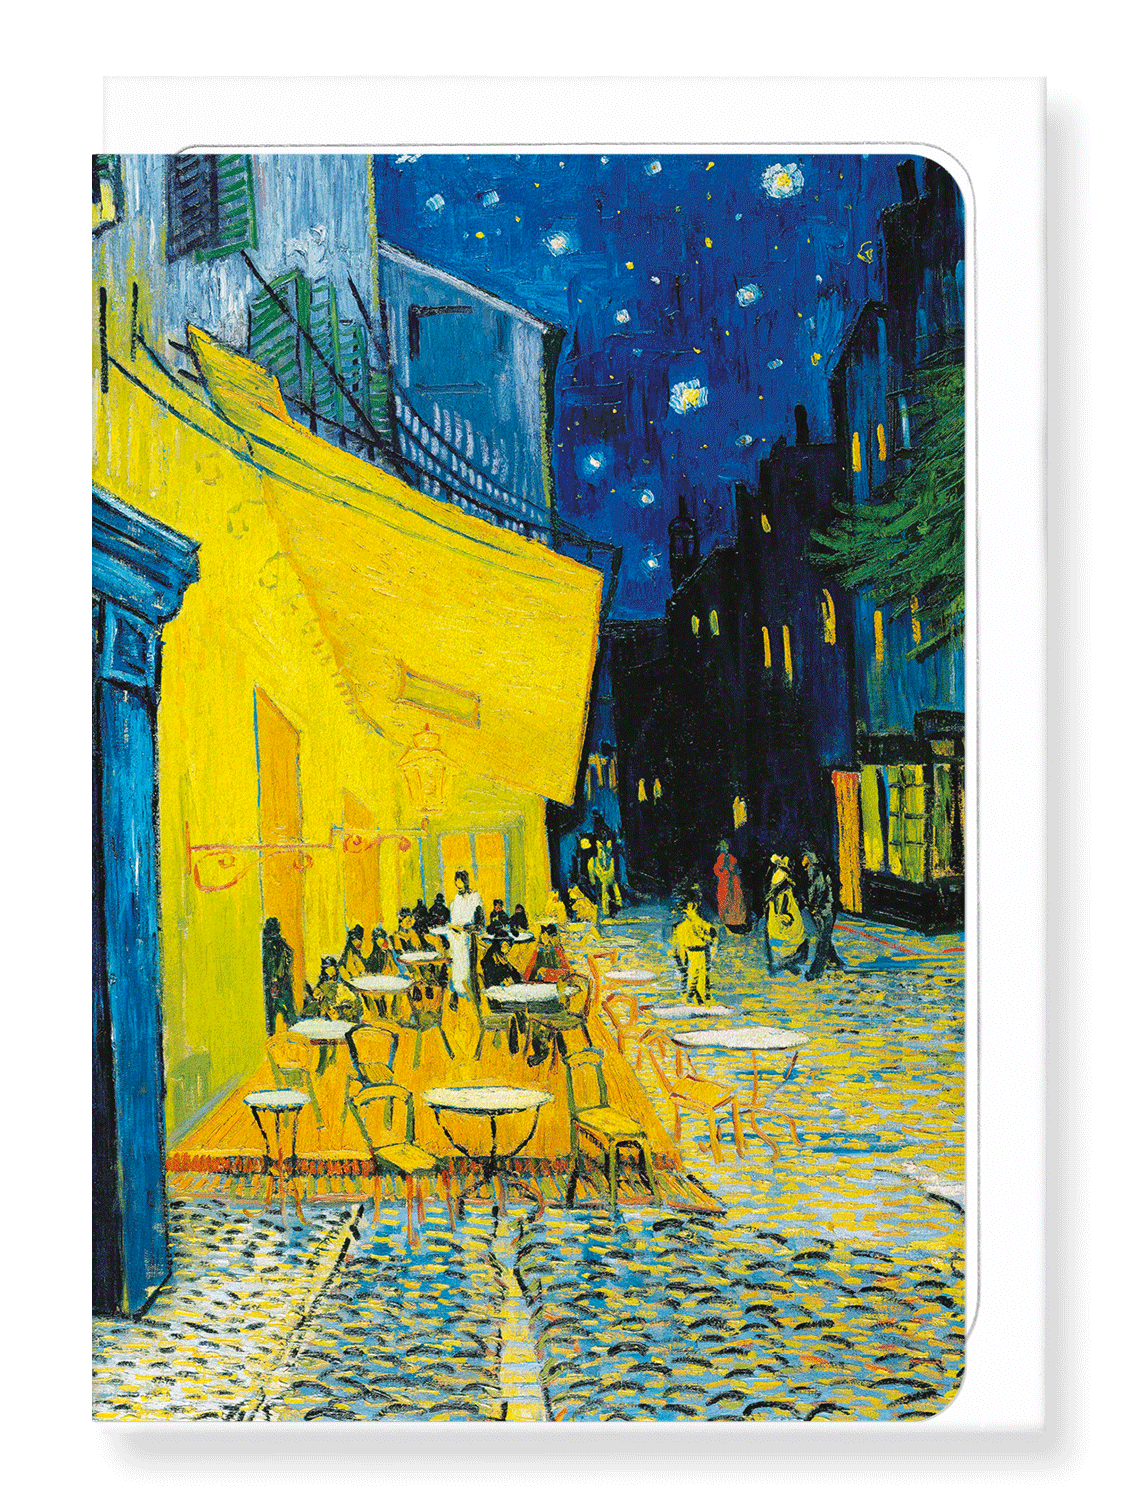 Ezen Designs - Café terrace at night by van gogh - Greeting Card - Front